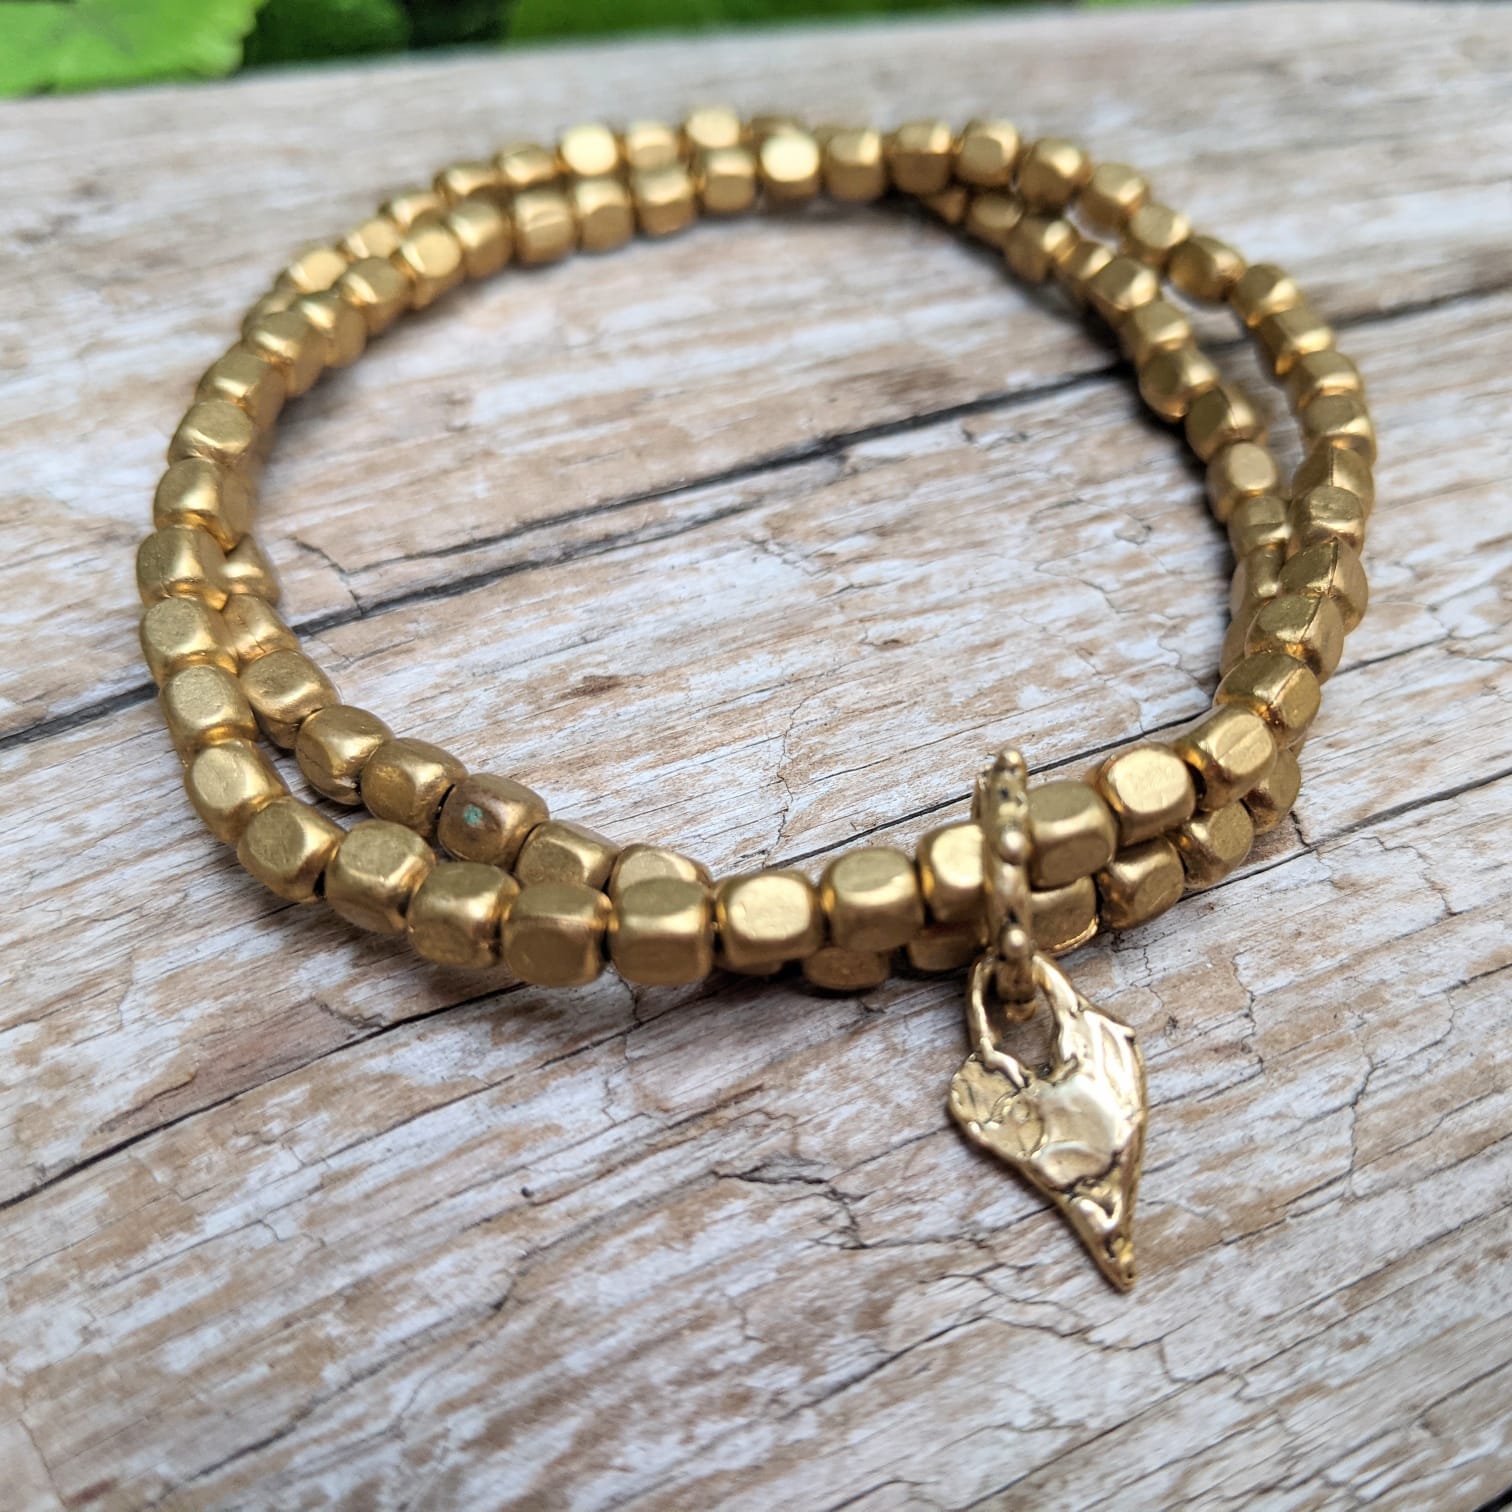 African Brass Elastic Double Bracelet with Heart Charm